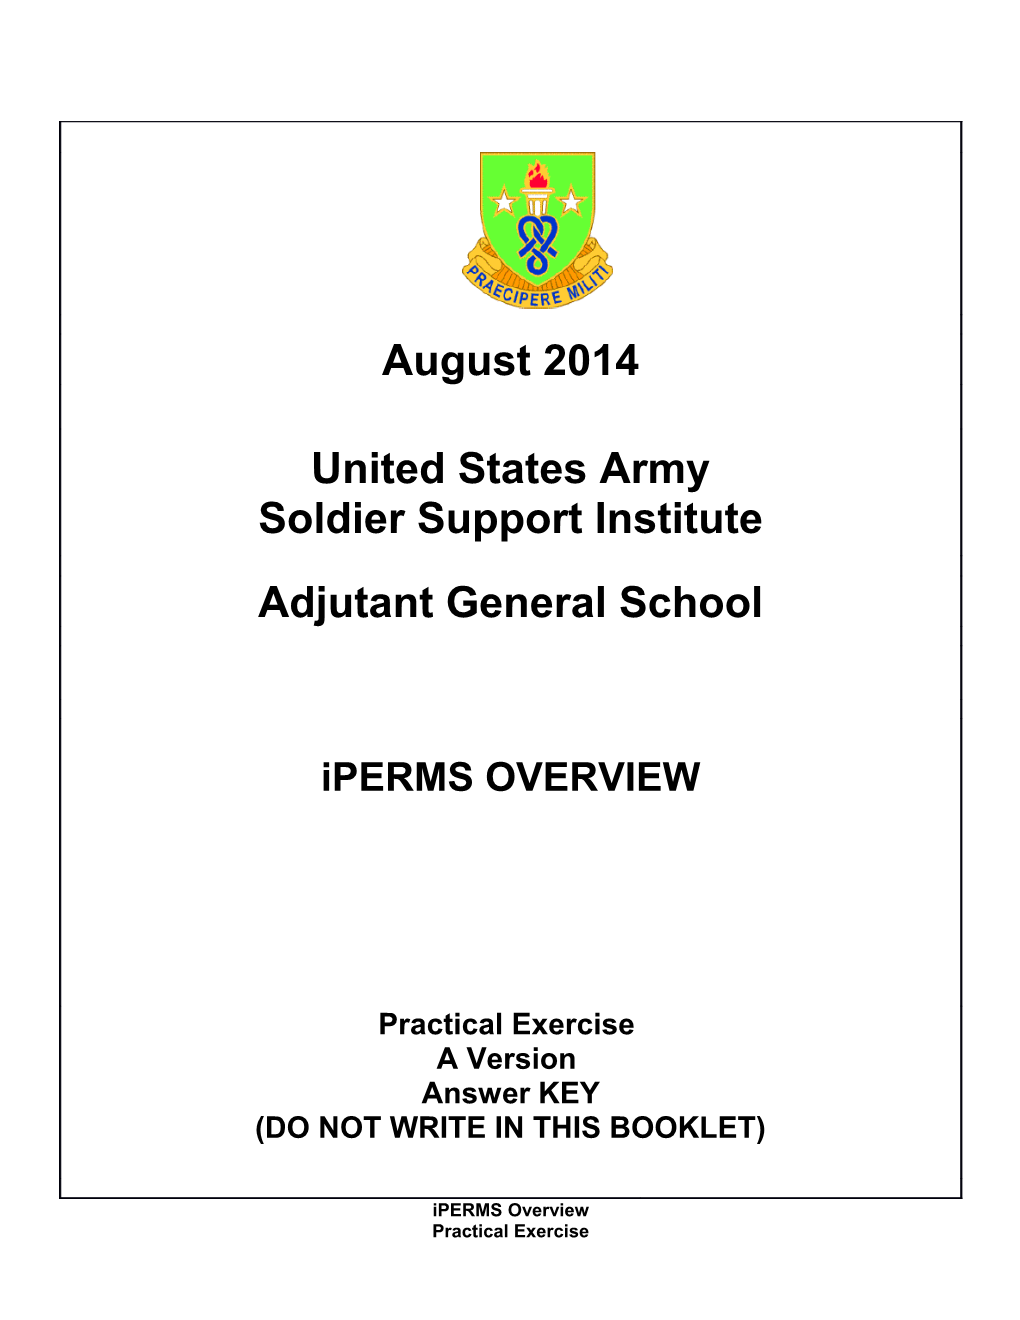 United States Army Soldier Support Institute